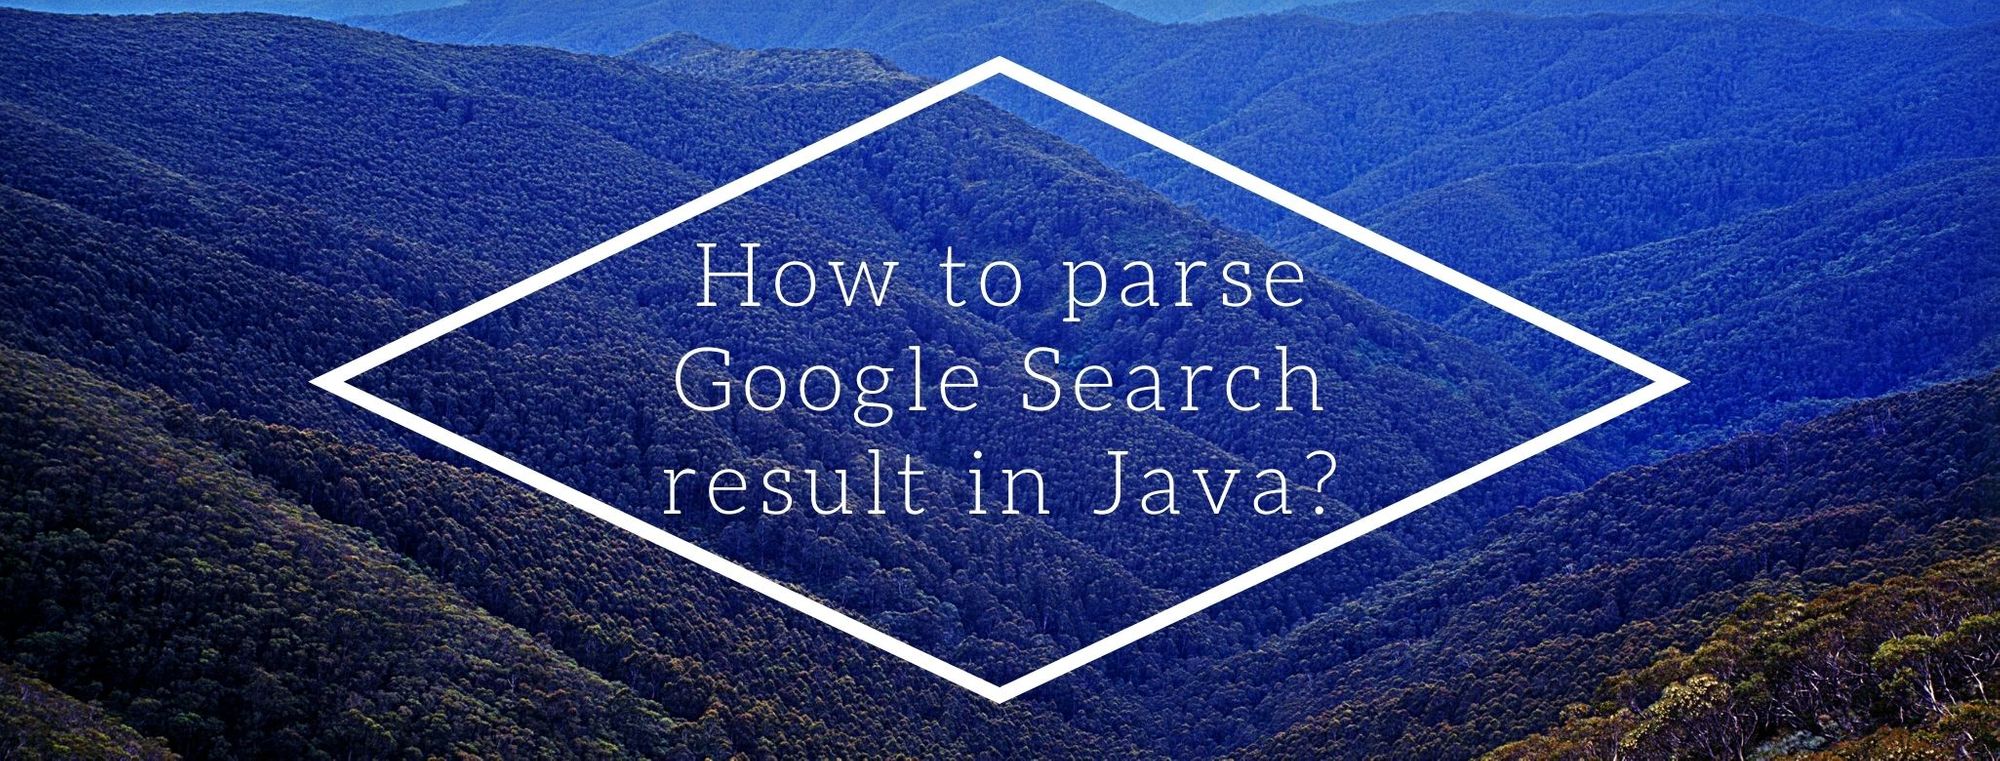 How to parse Google Search result in Java?